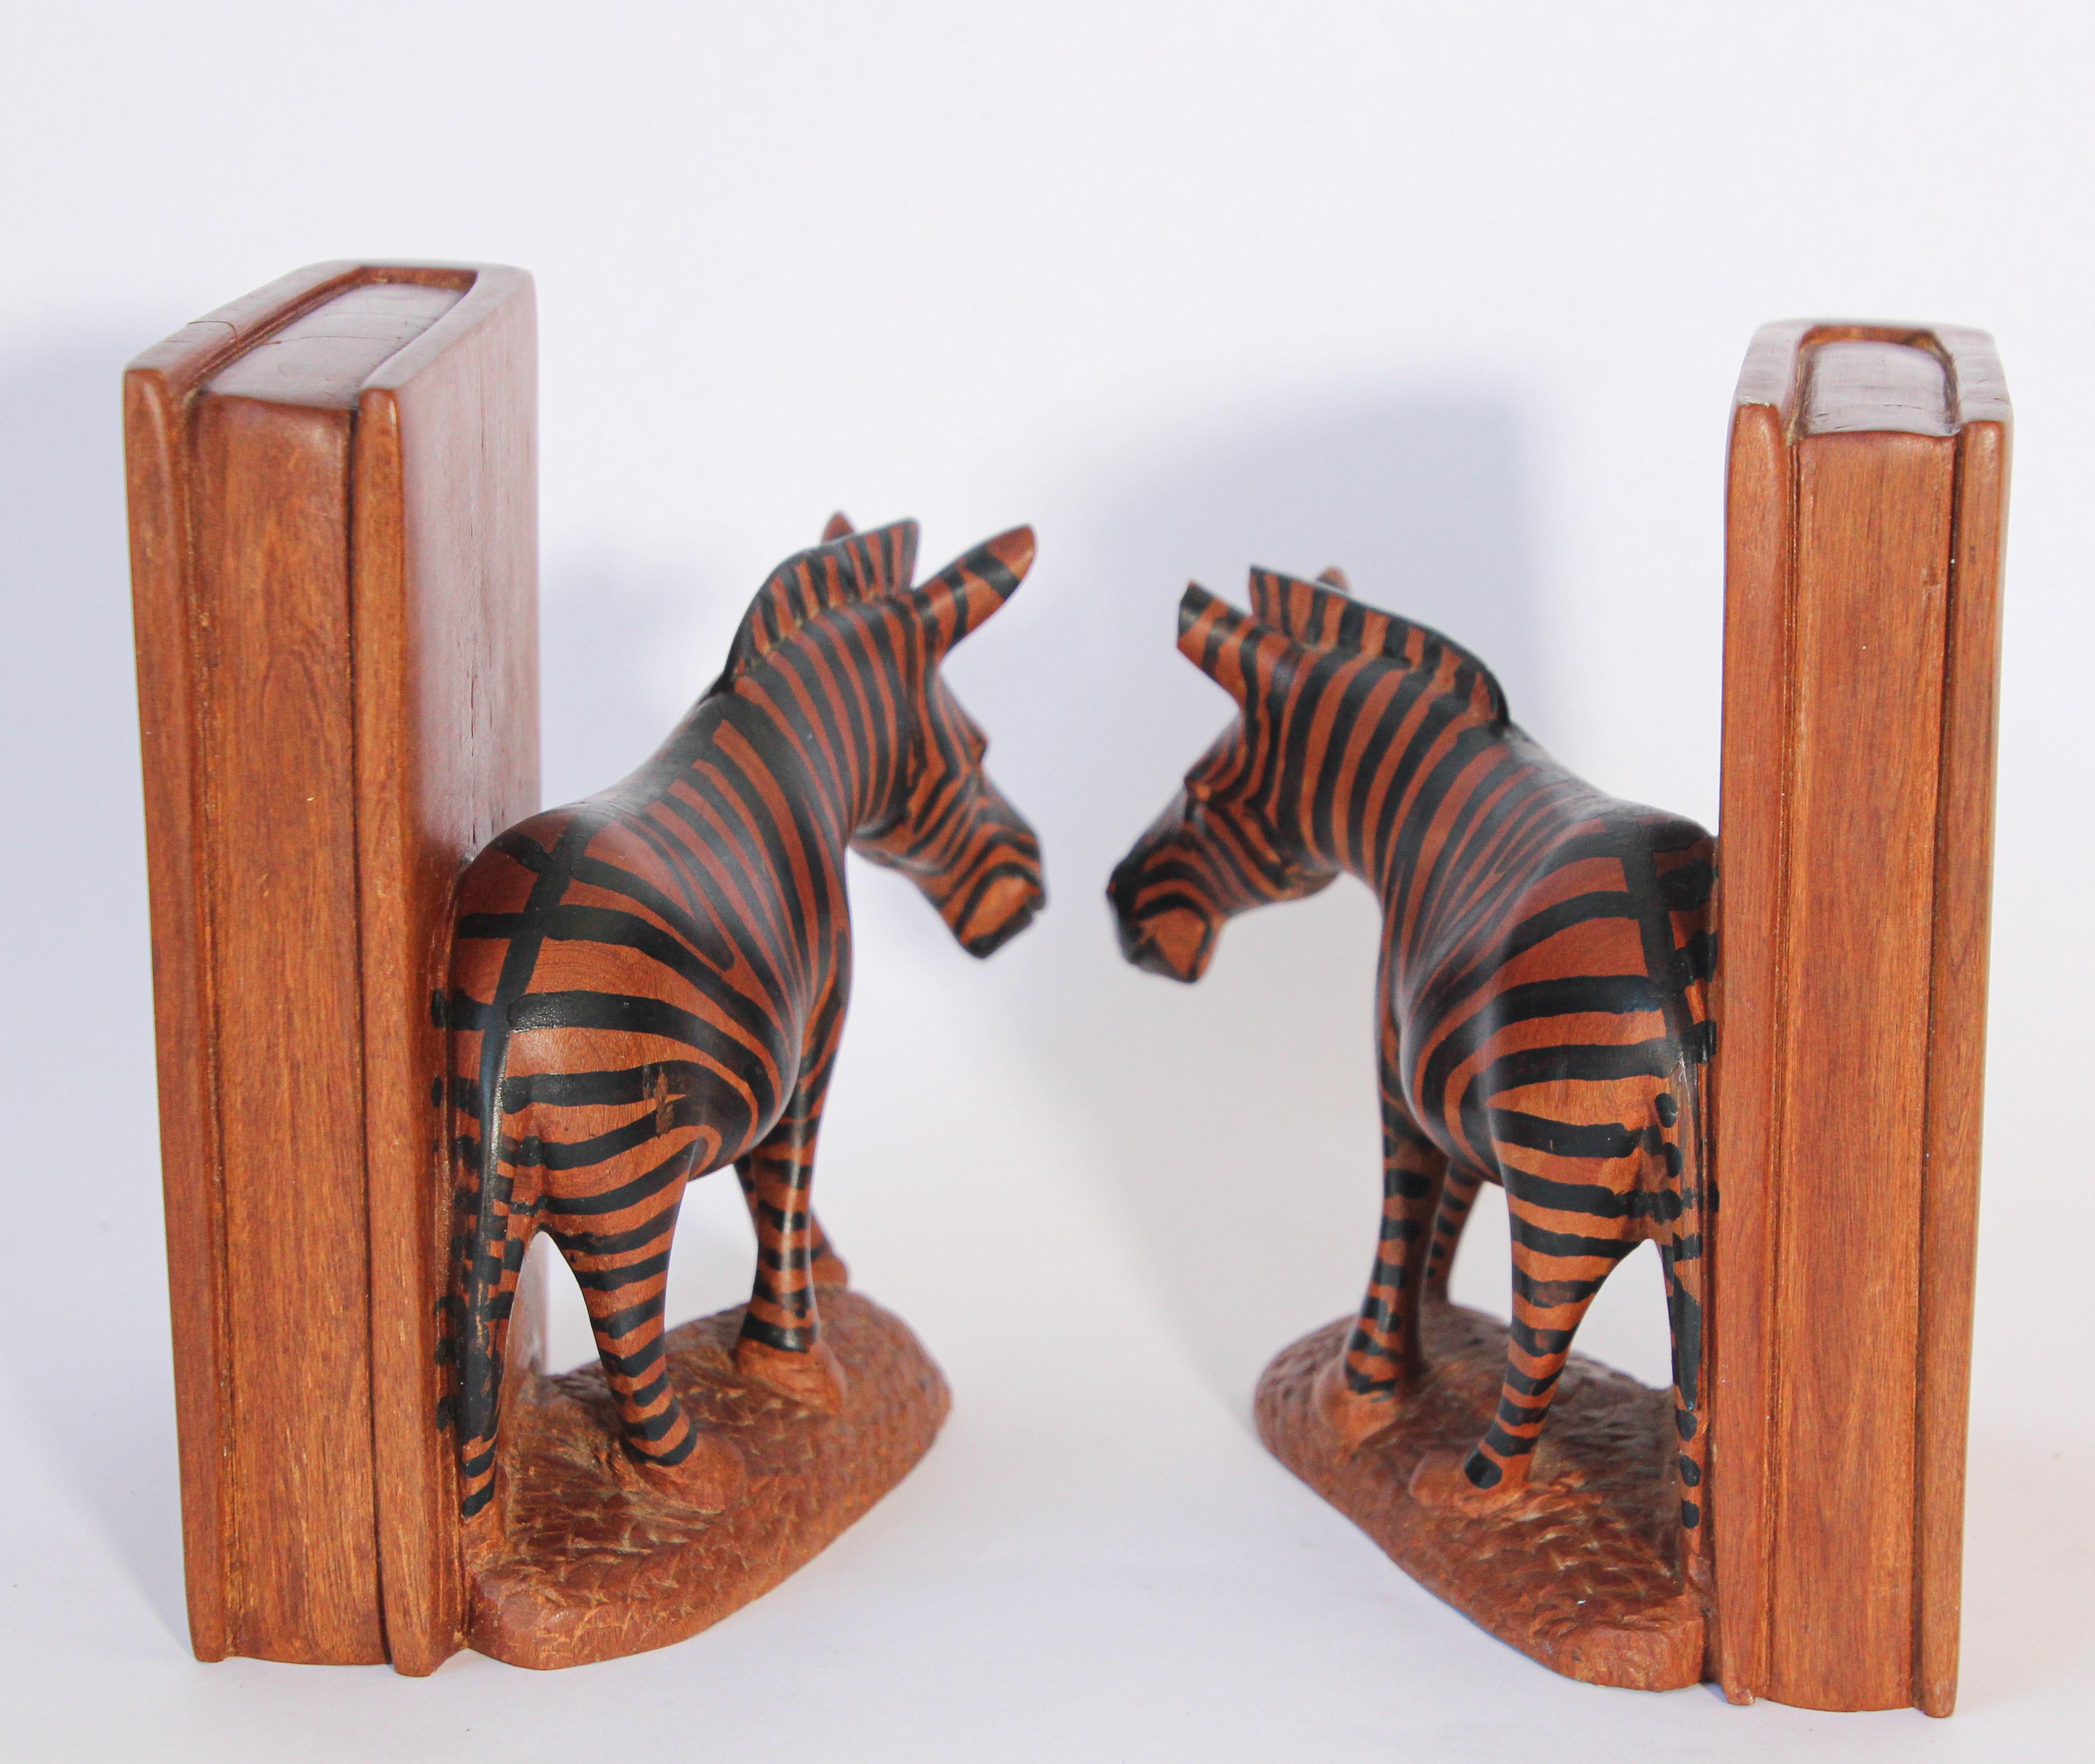 Hand-Carved Hand Carved African Zebra Bookends For Sale